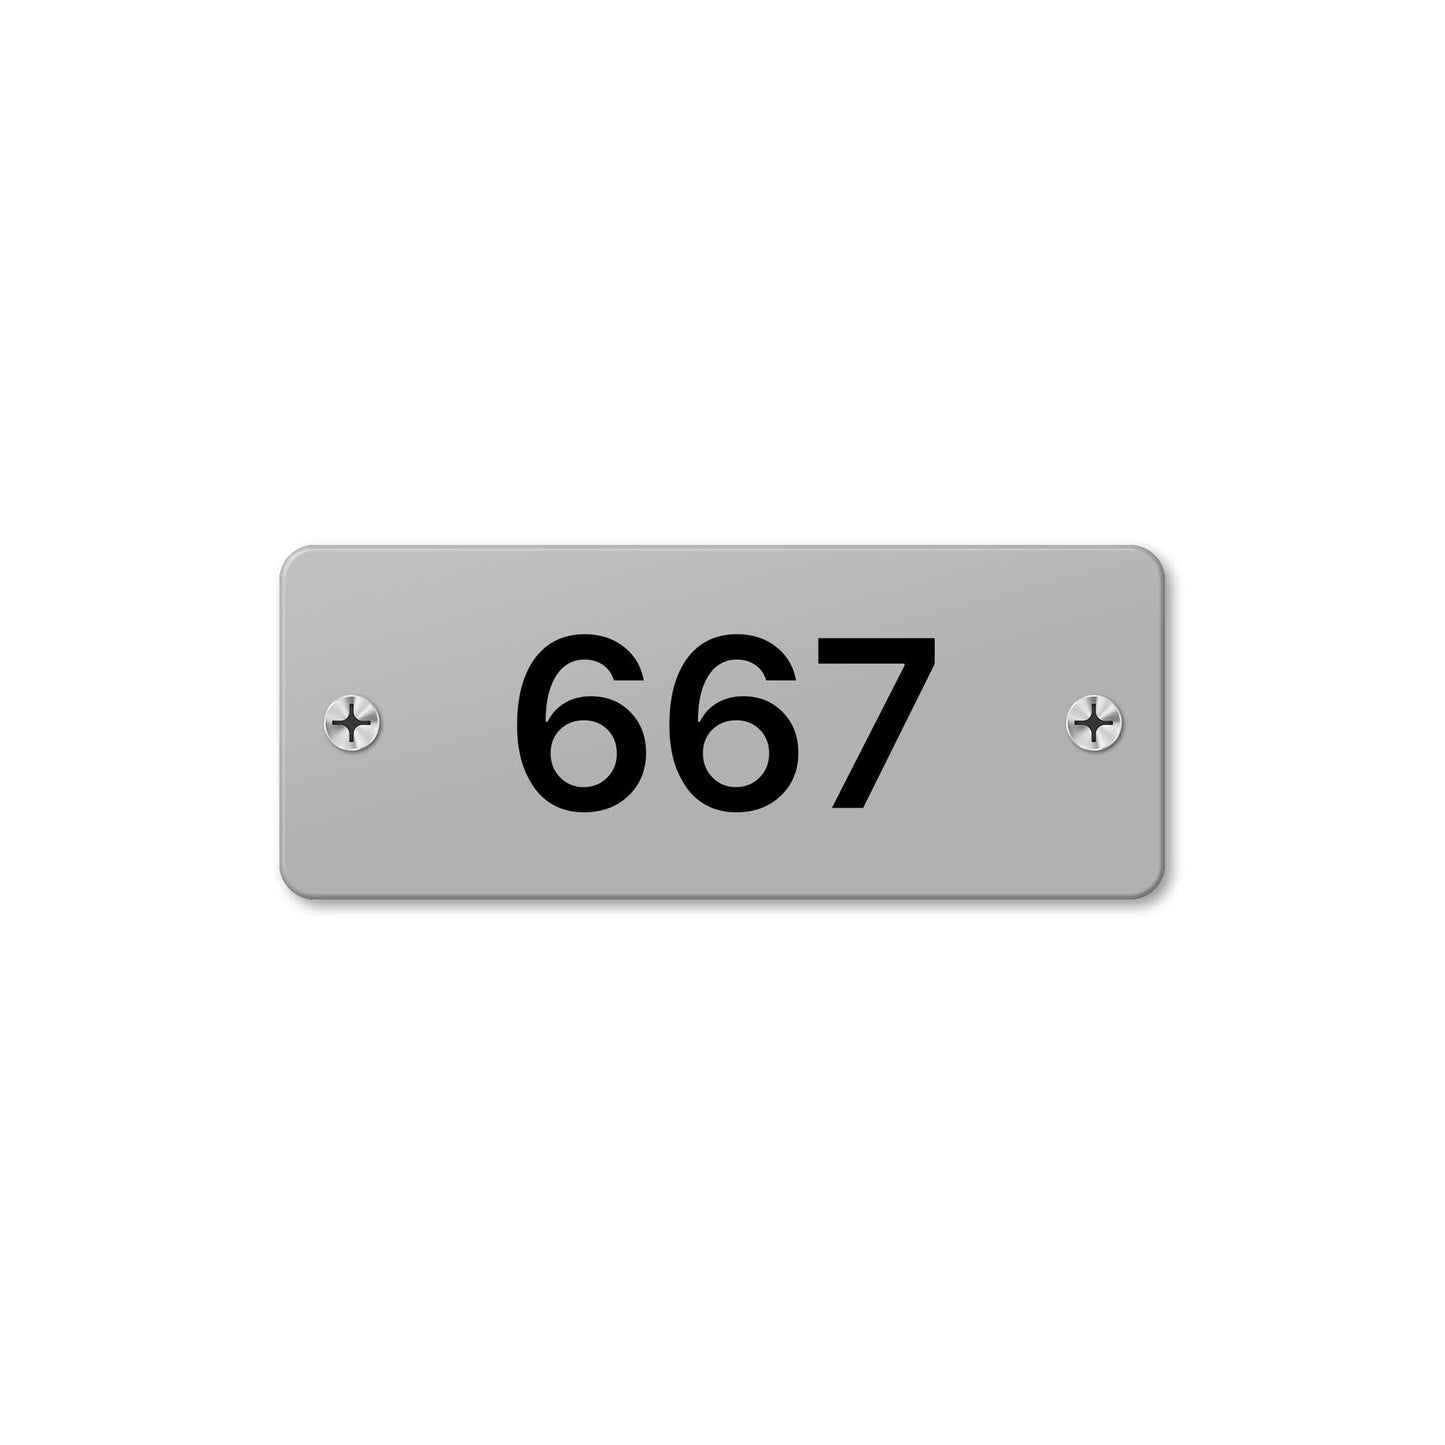 Numeral 667